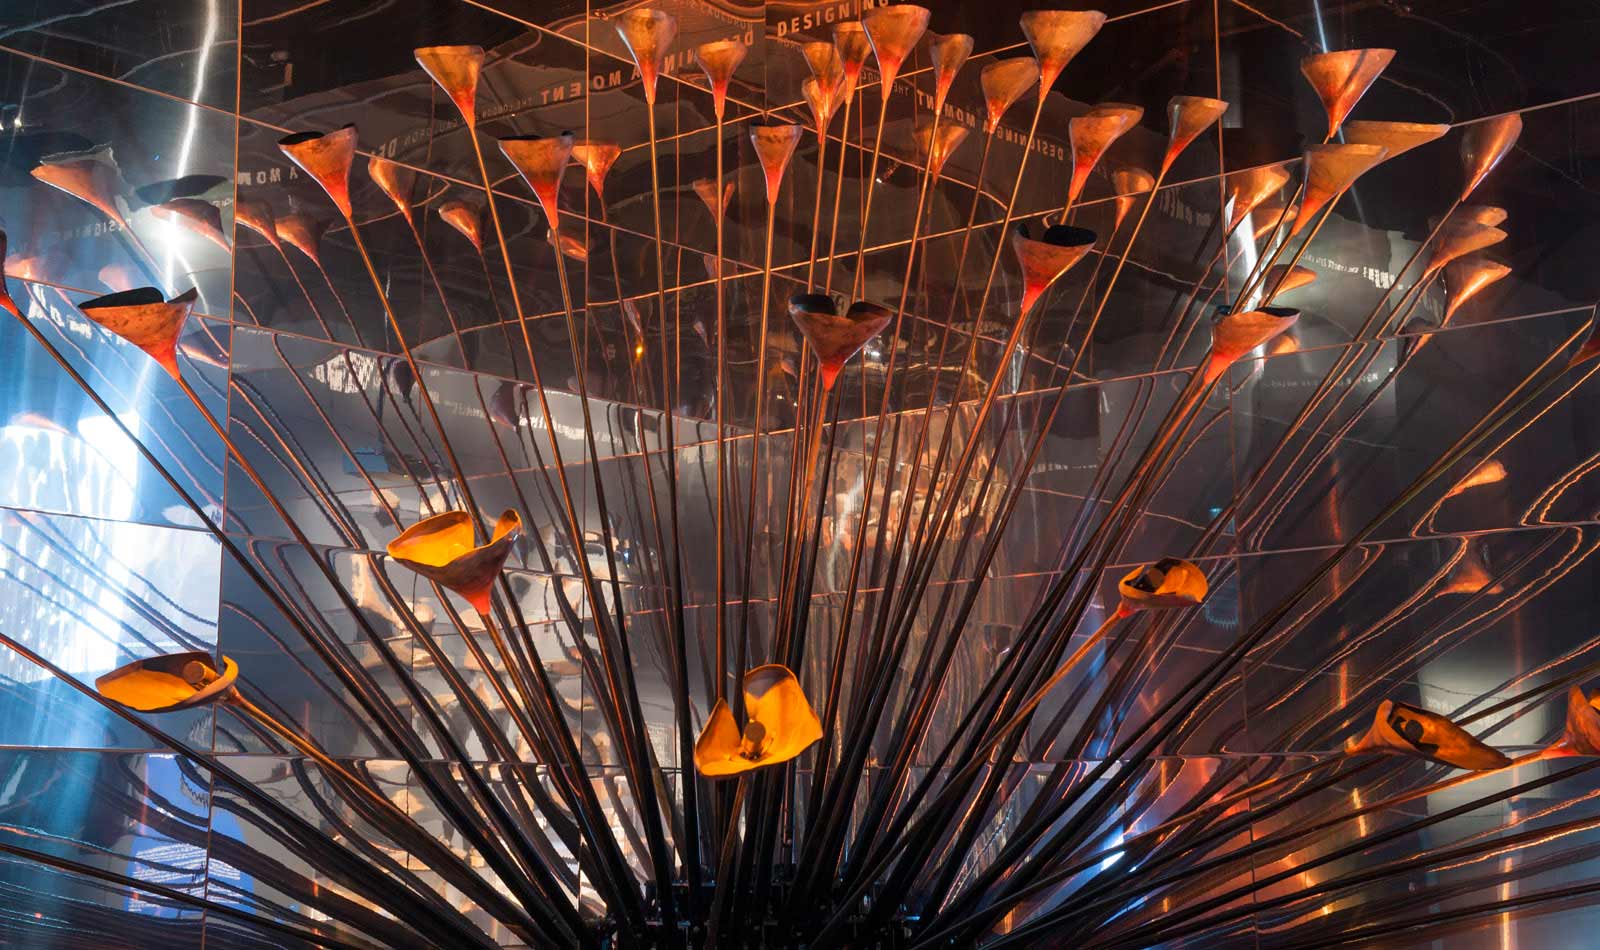 The London 2012 Olympic Cauldron on display with its petals open and splayed.